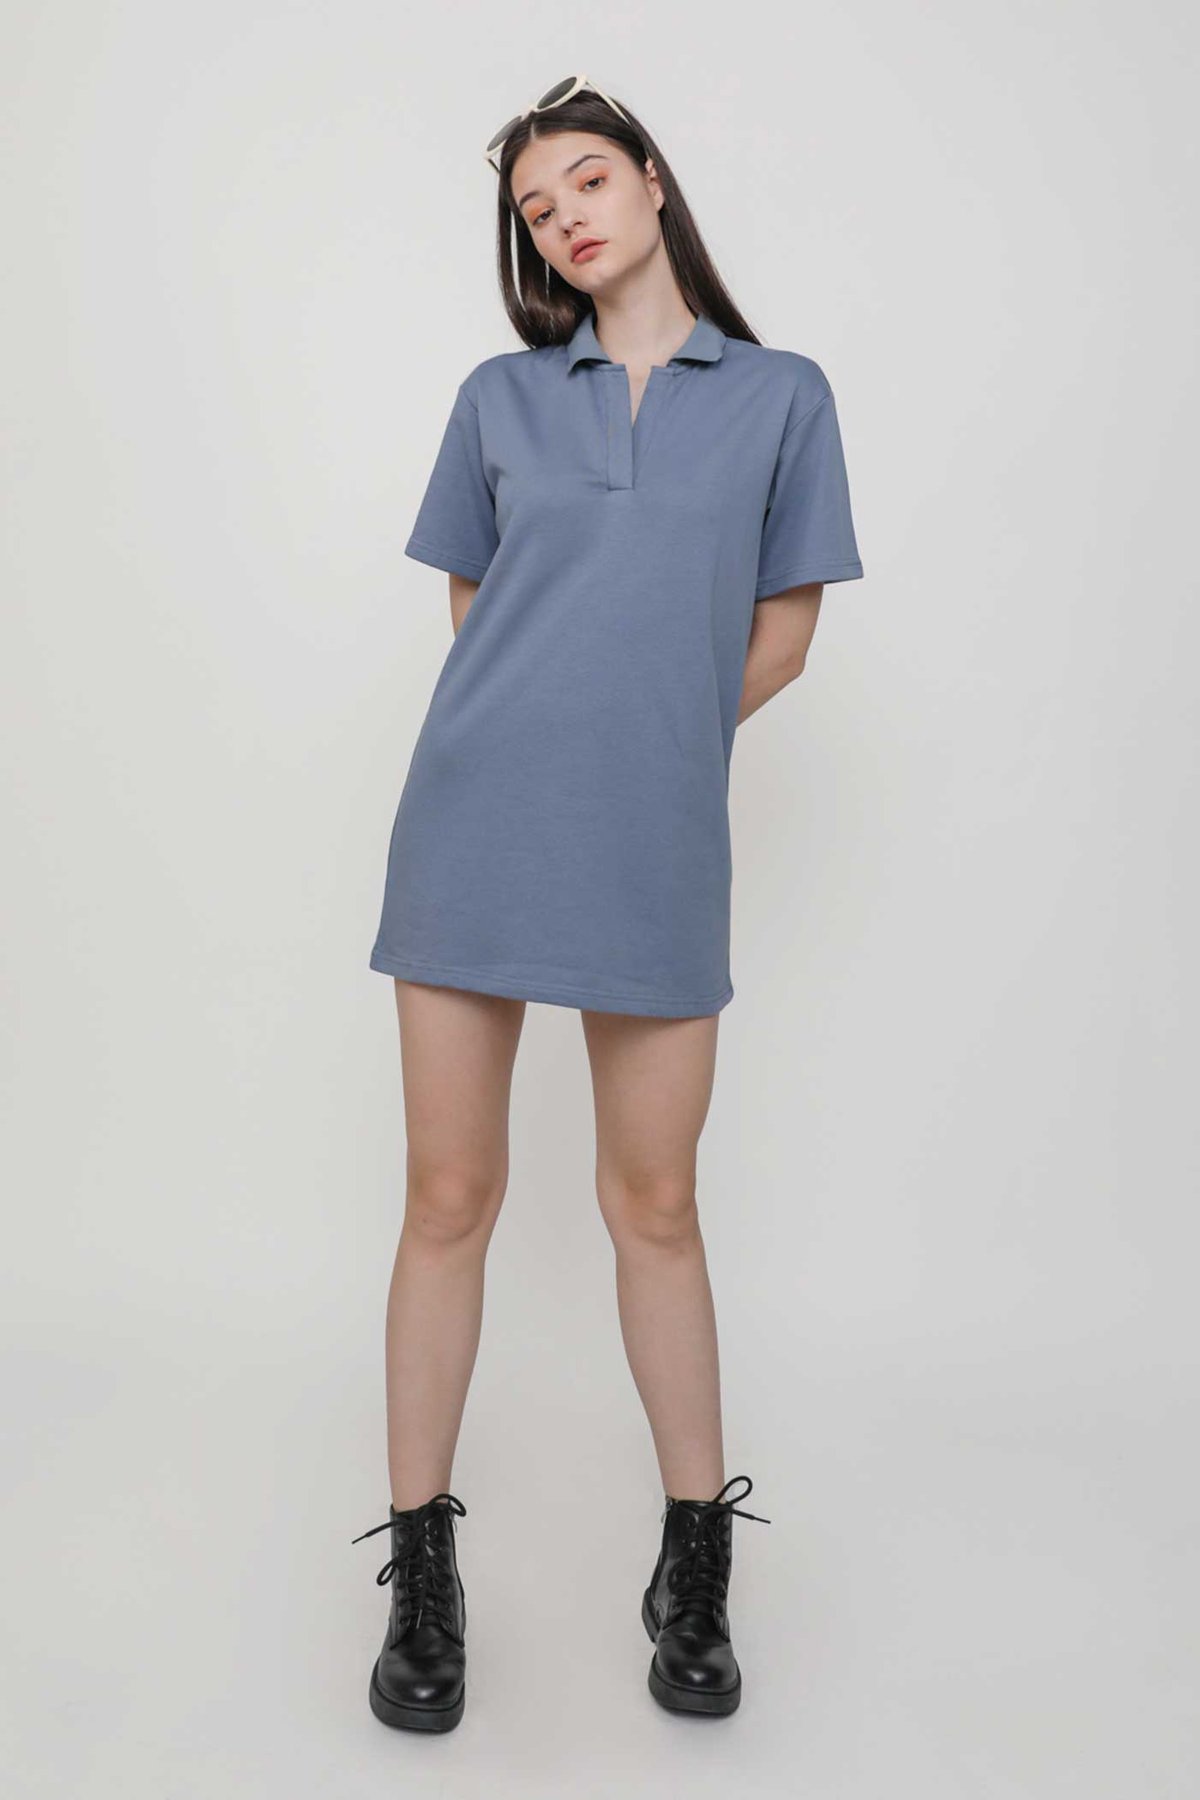 Anderson Polo Dress (Periwinkle)